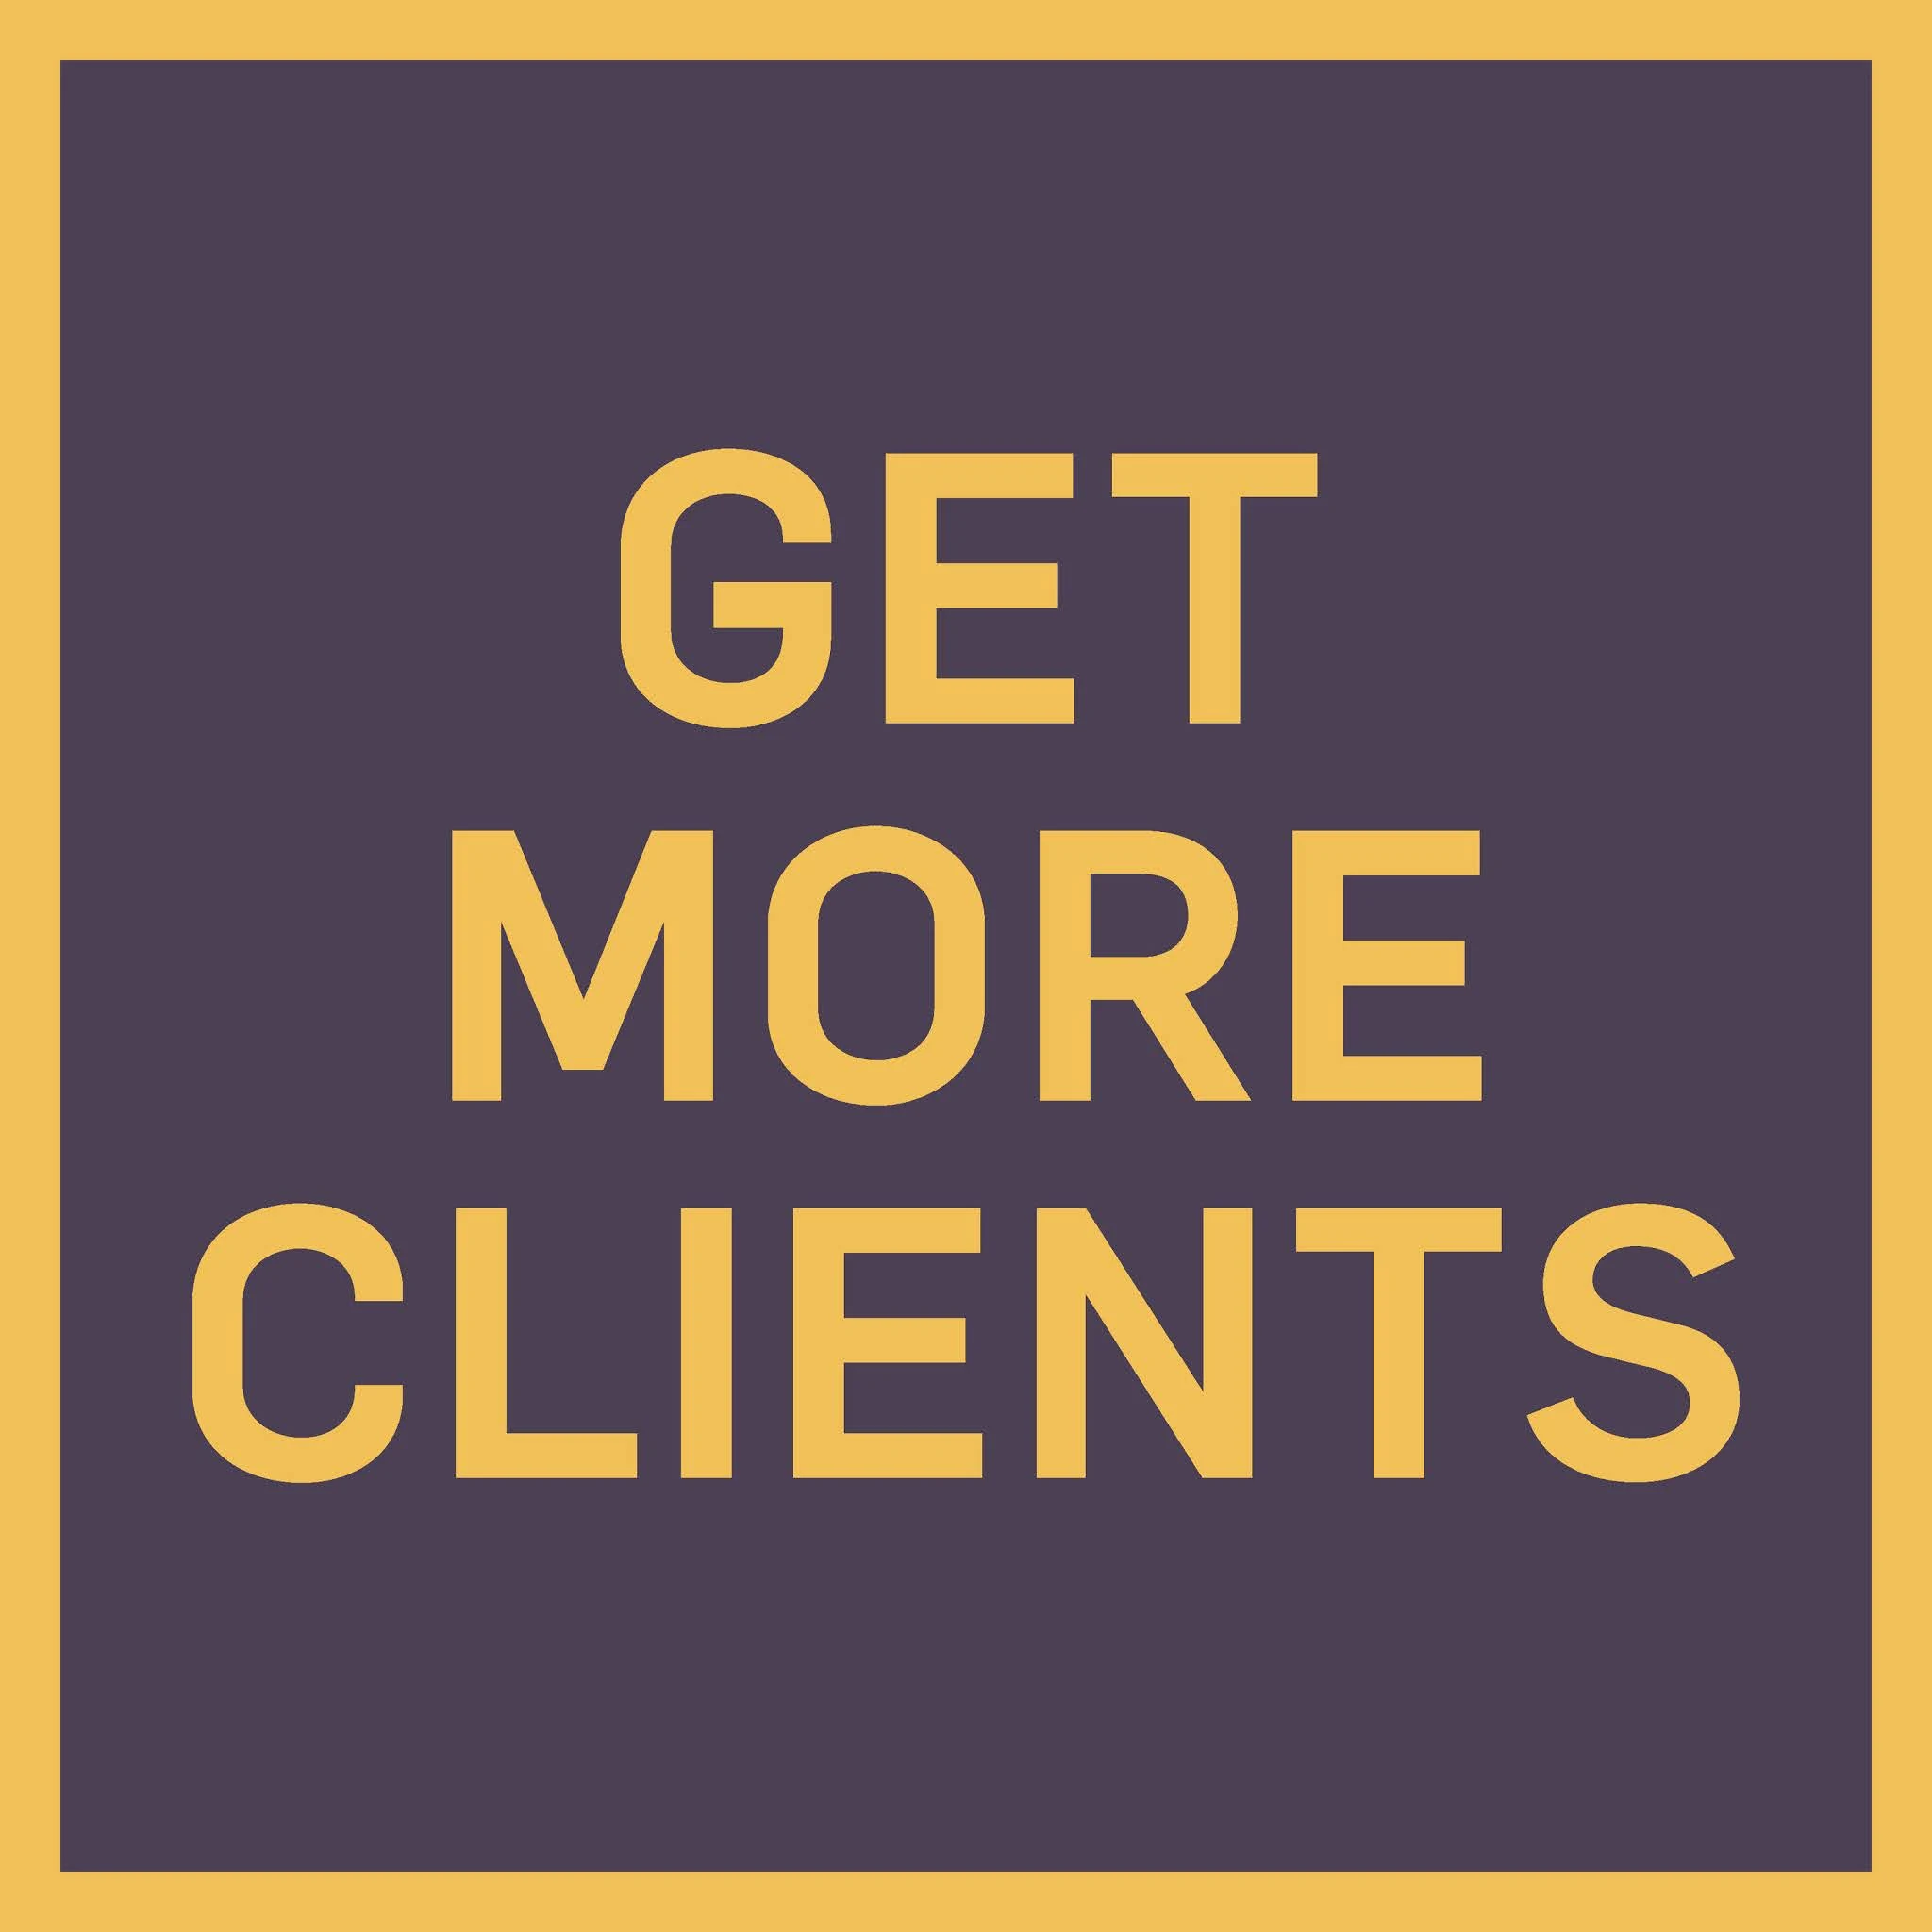 Getting New Clients for Your Business